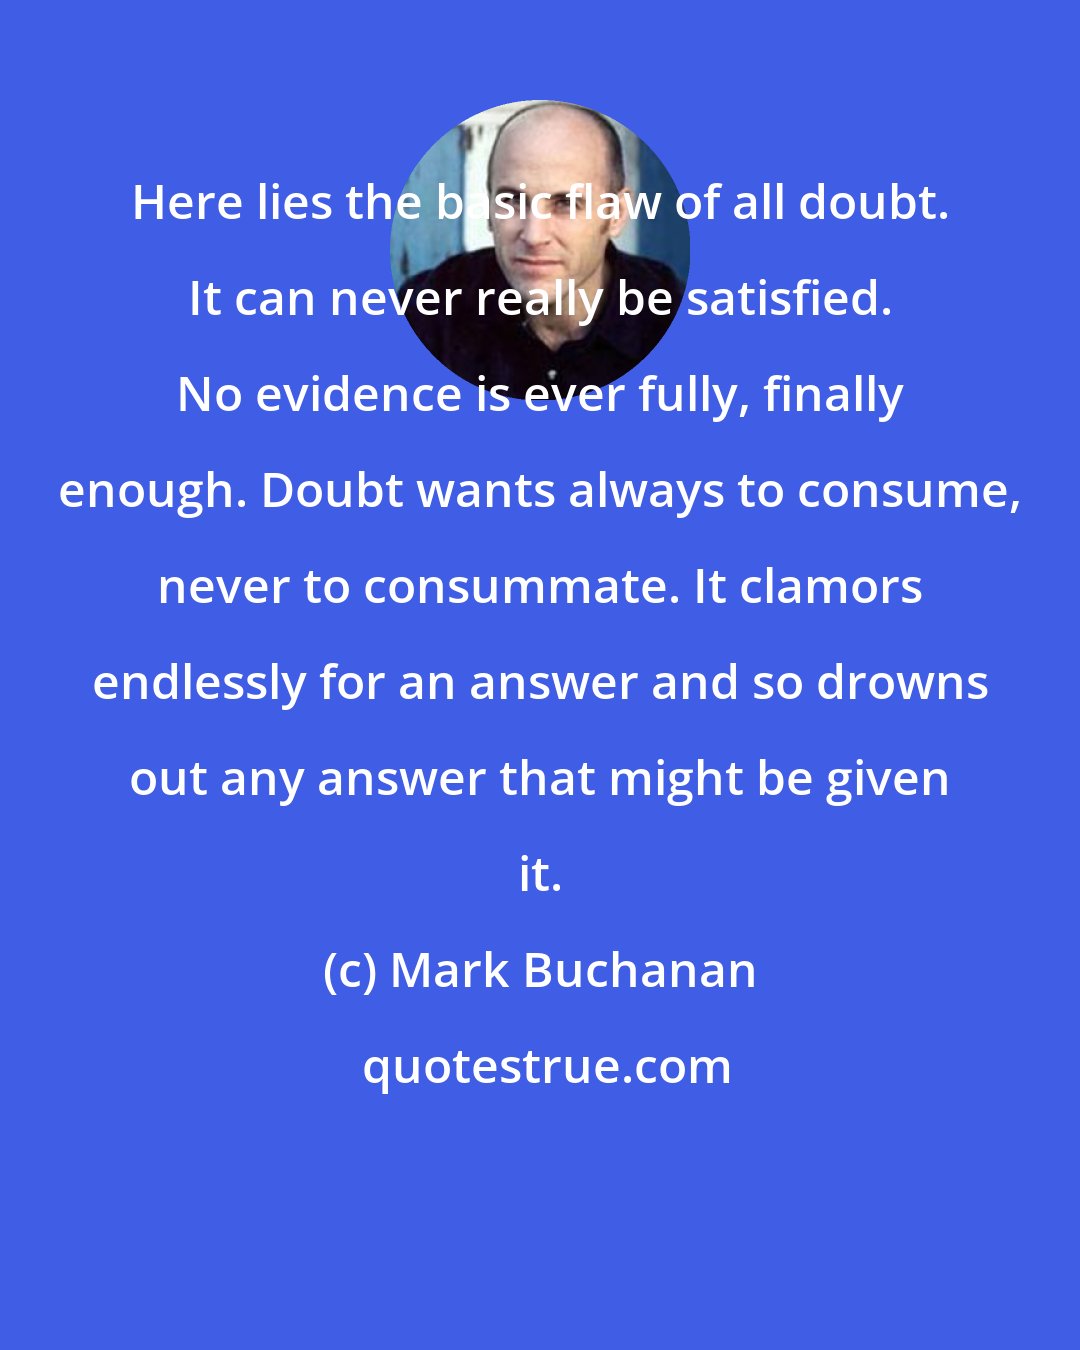 Mark Buchanan: Here lies the basic flaw of all doubt. It can never really be satisfied. No evidence is ever fully, finally enough. Doubt wants always to consume, never to consummate. It clamors endlessly for an answer and so drowns out any answer that might be given it.